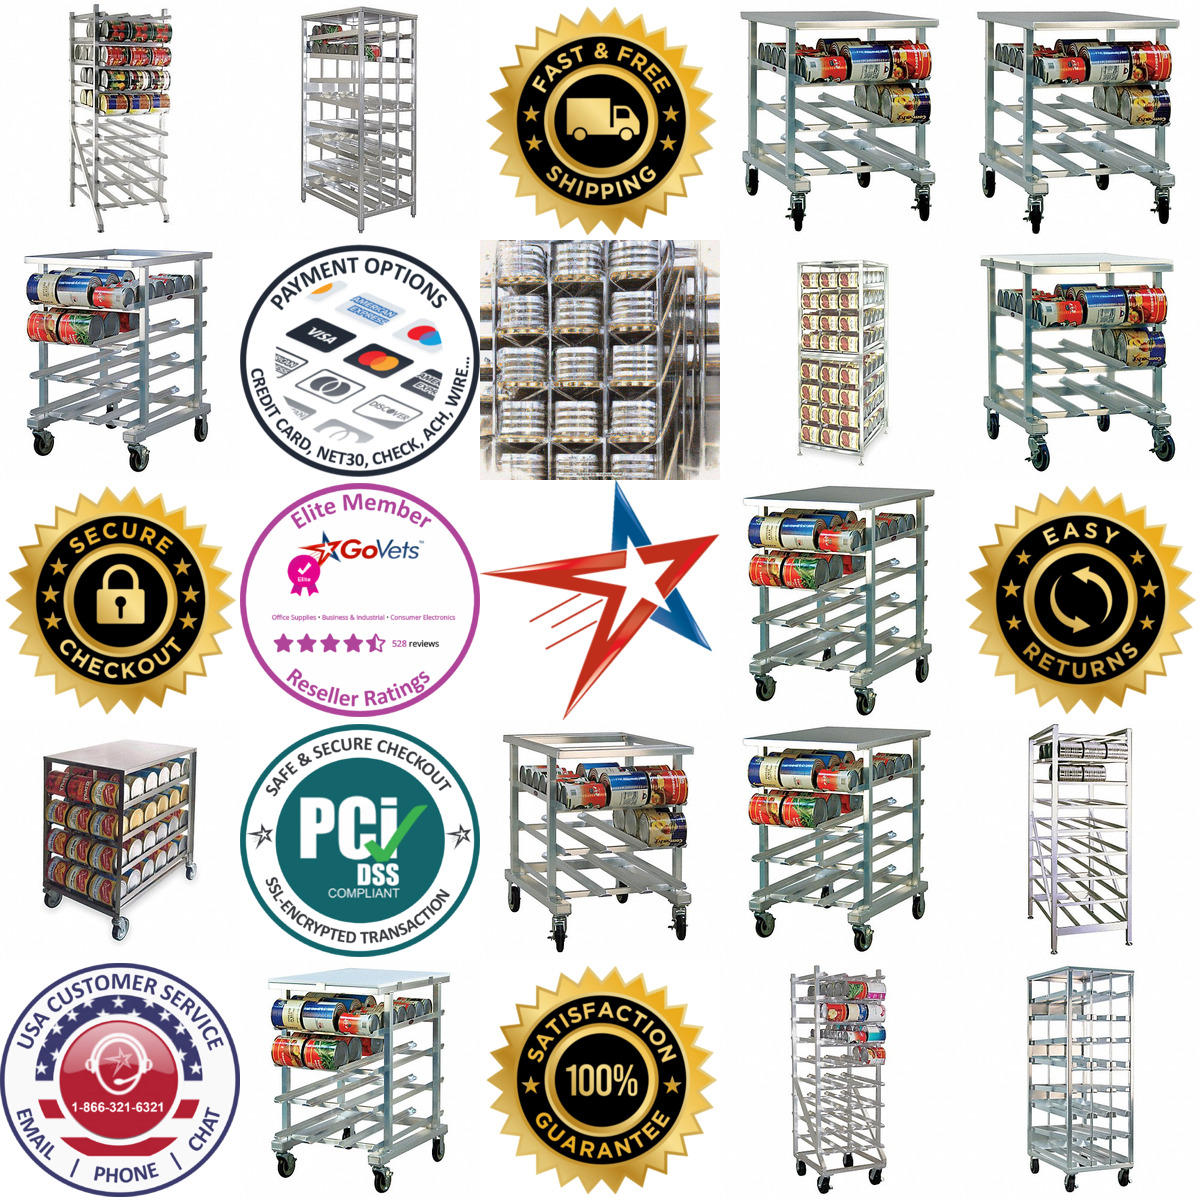 A selection of Can Storage Racks products on GoVets